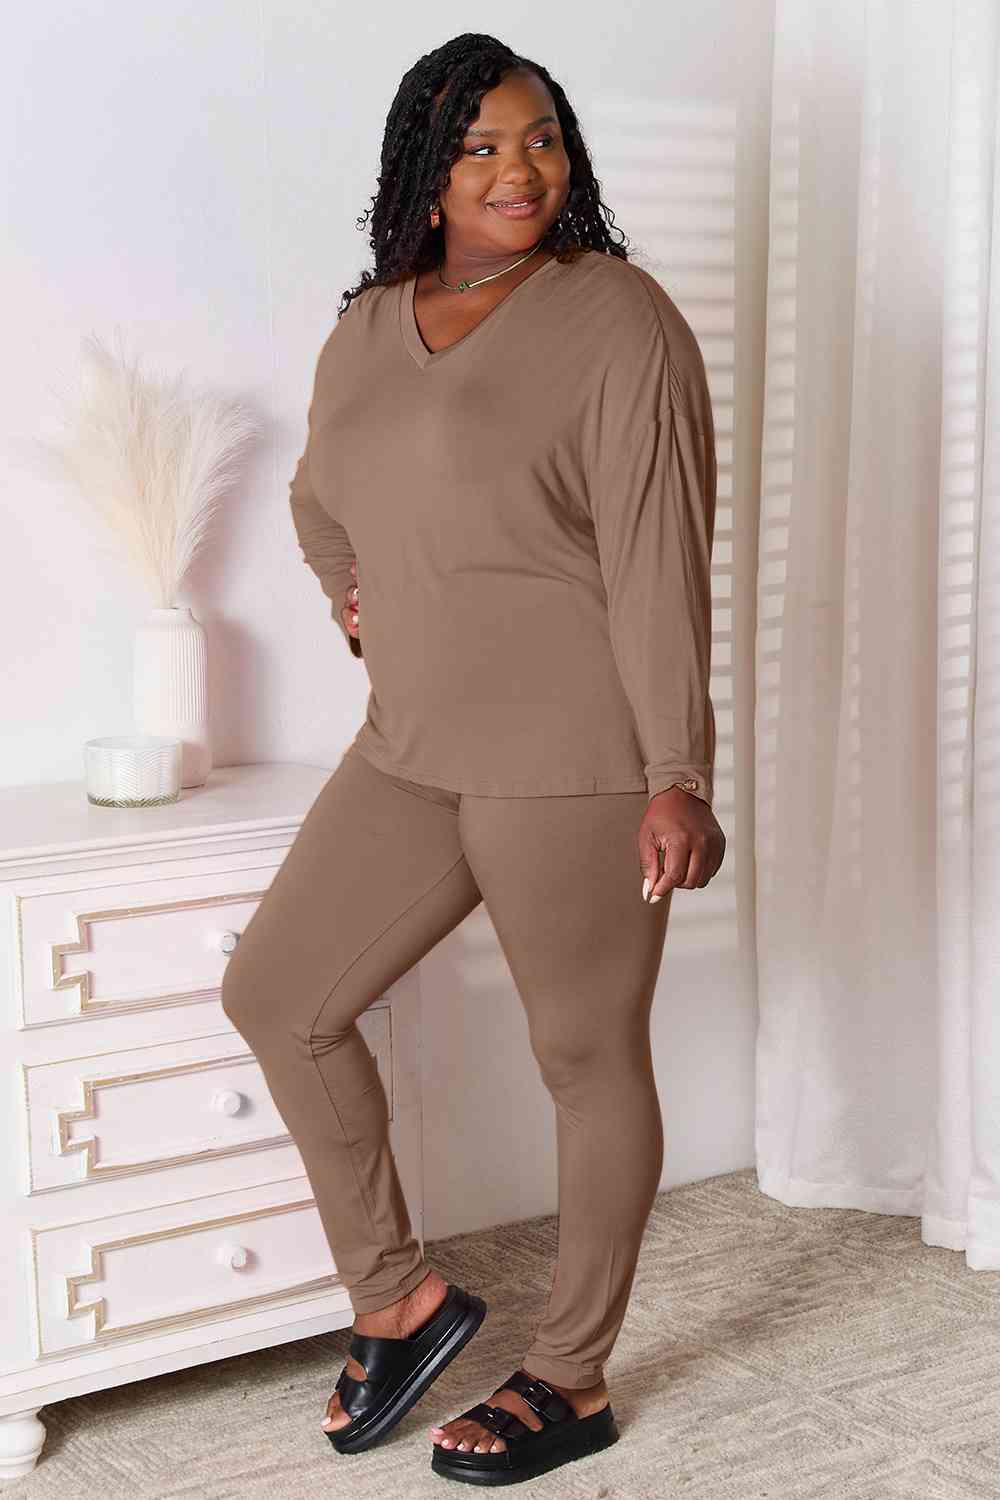 V-Neck Soft Rayon Long Sleeve Top and Pants Lounge Set - Taupe / S - Bottoms - Outfit Sets - 17 - 2024